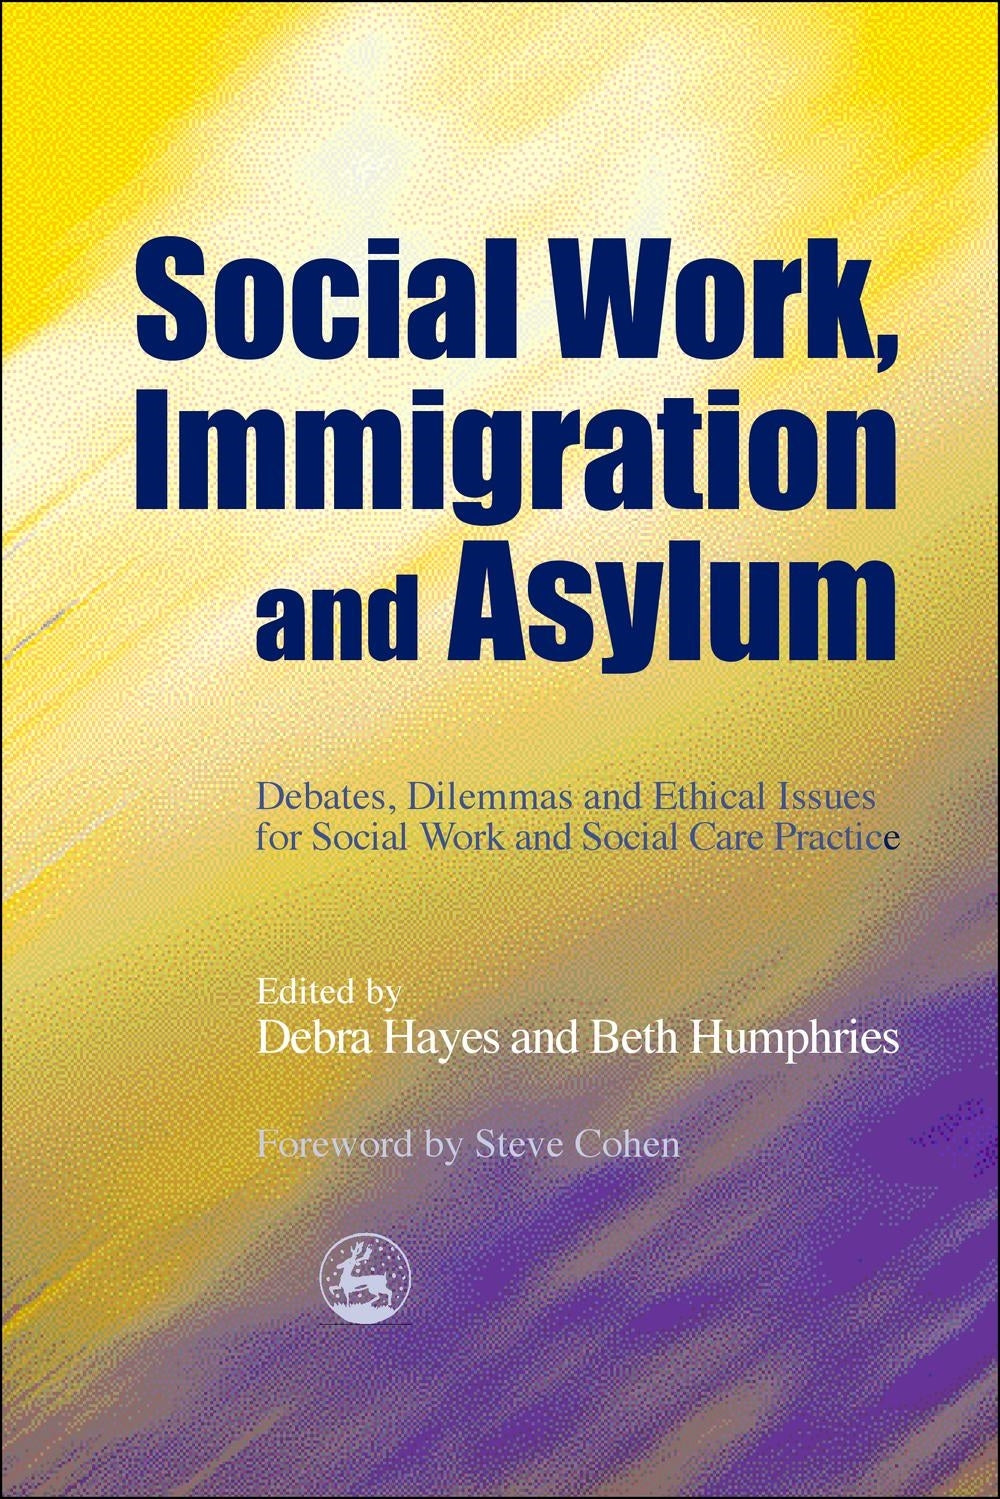 Social Work, Immigration and Asylum by No Author Listed, Debra Hayes, Beth Humphries